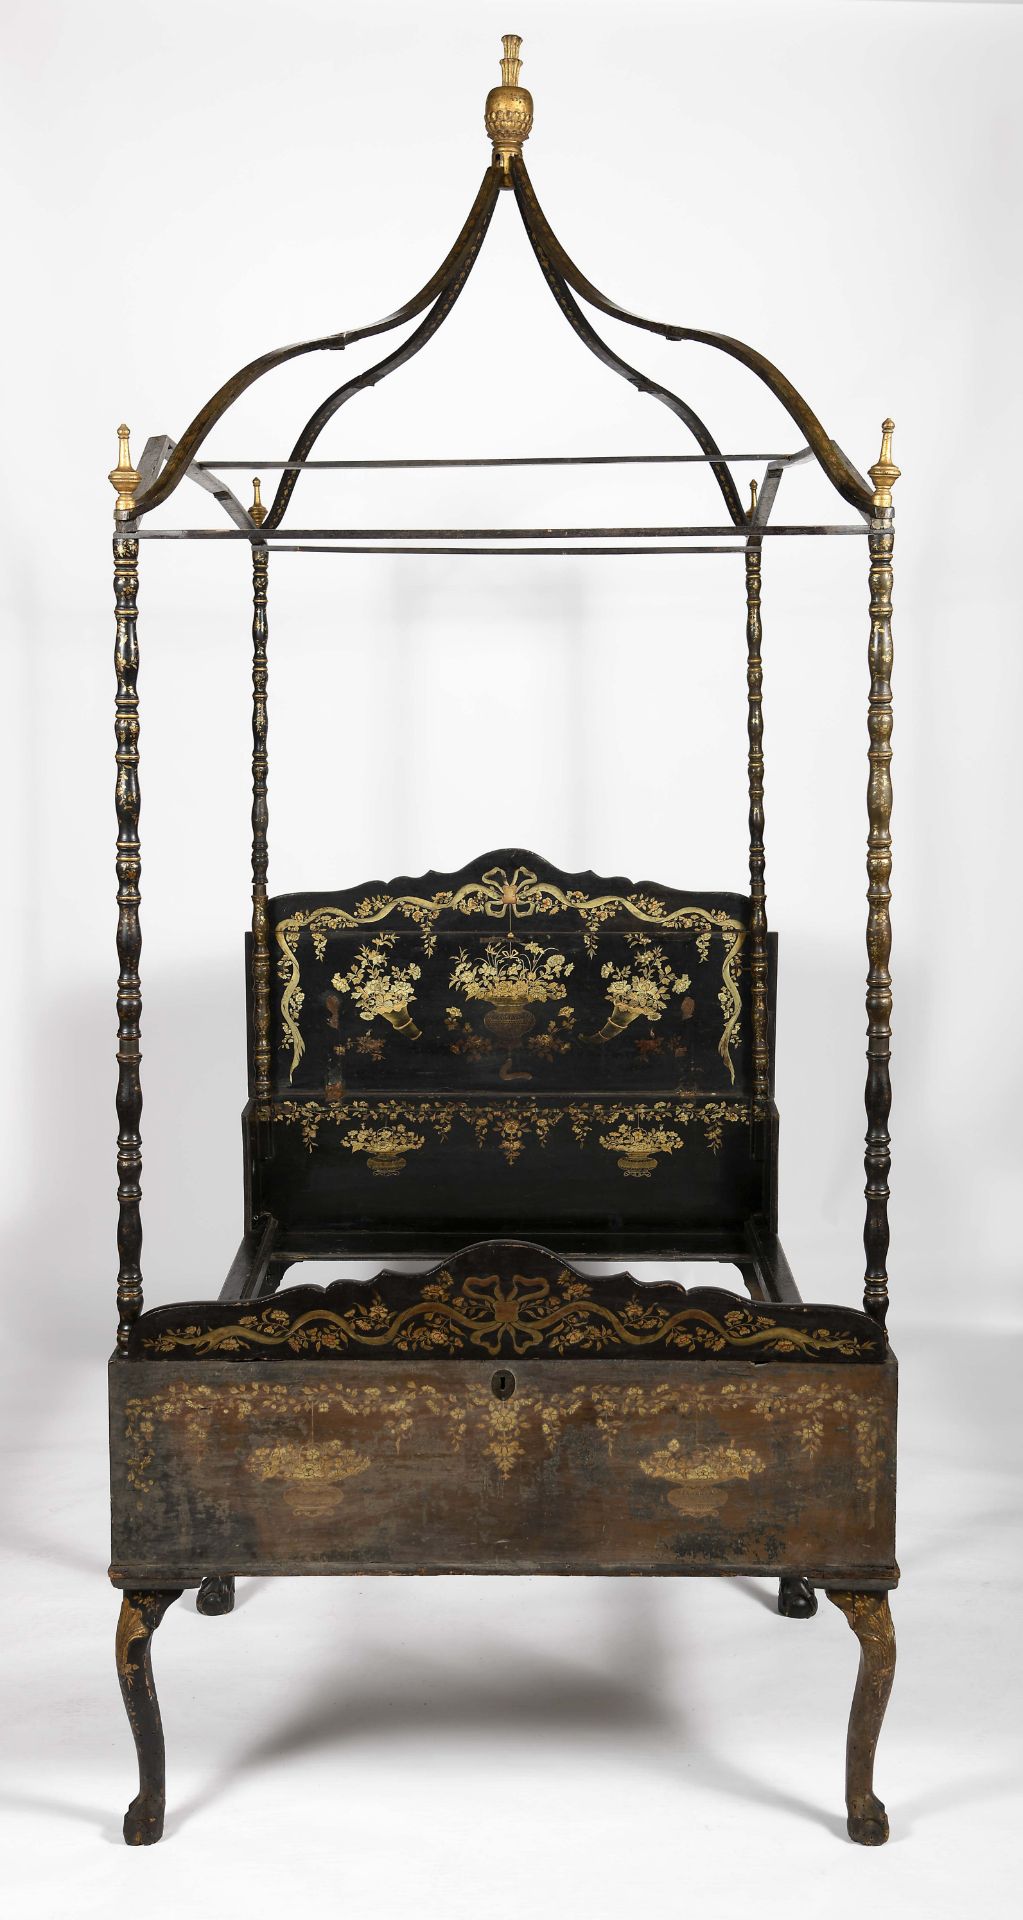 A chest convertible into a four-poster field bed